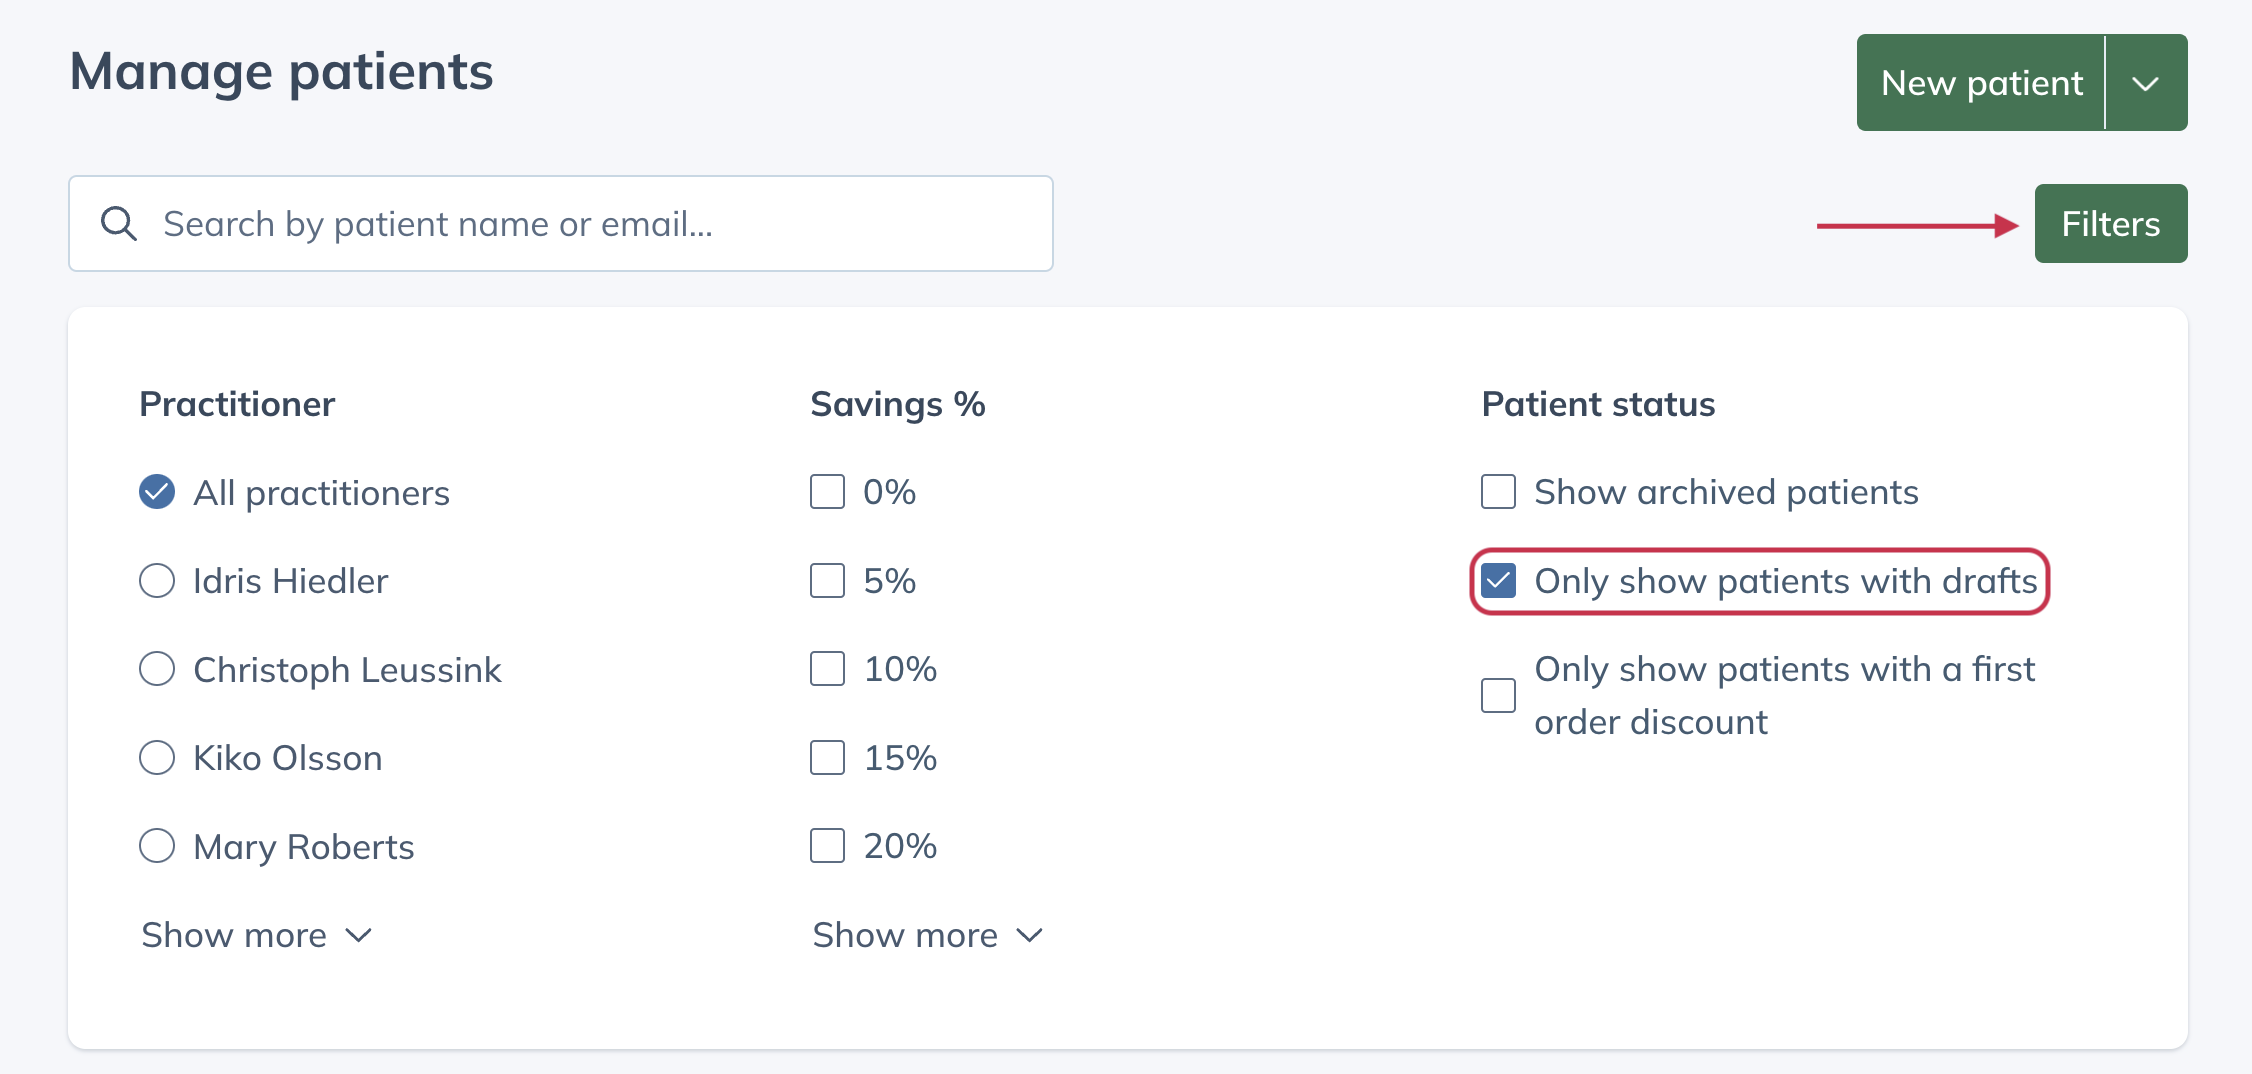 Click on the Filters button to reveal the filter for showing clients with draft prescriptions.